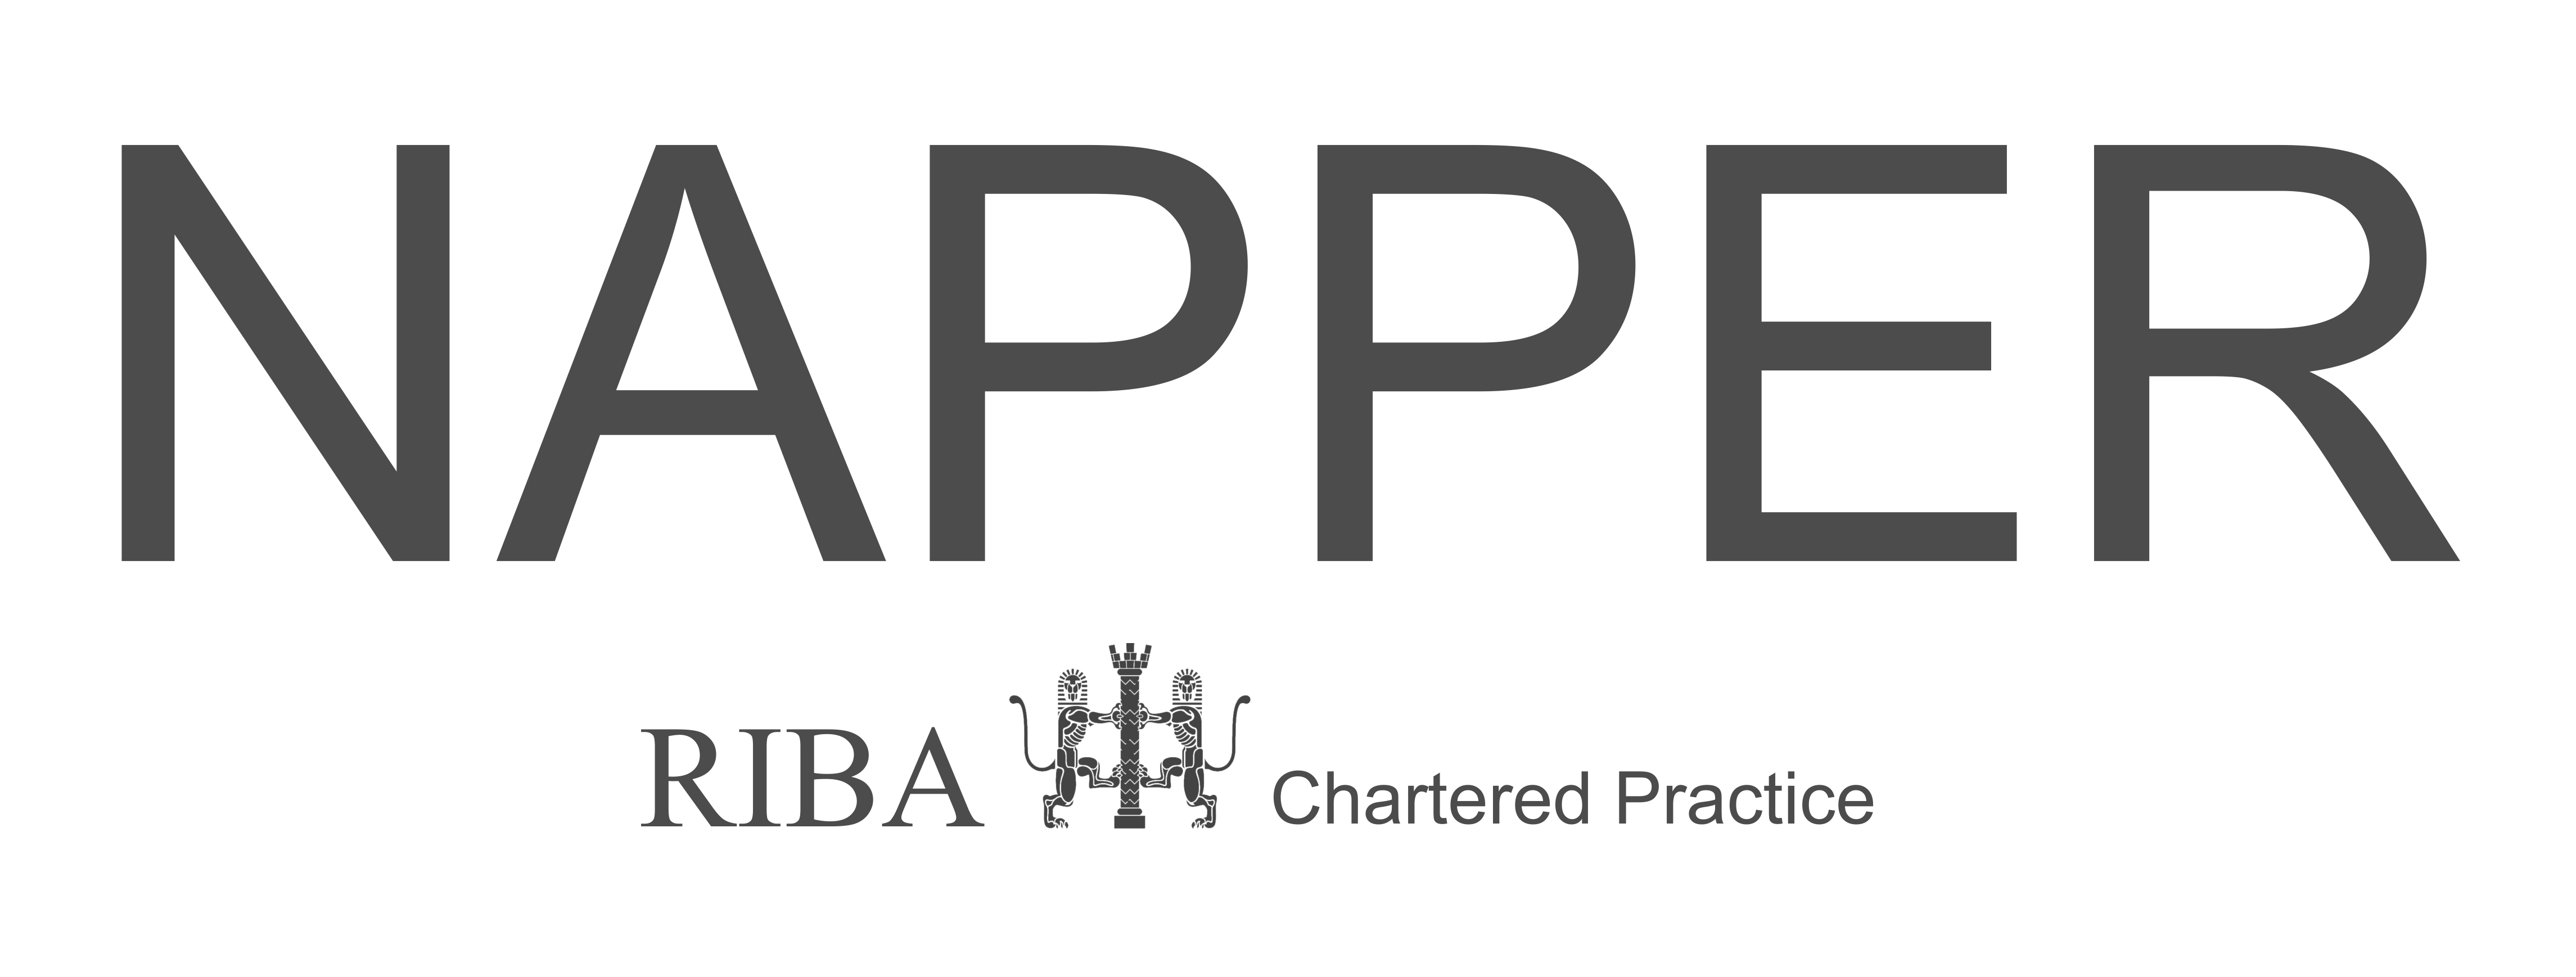 logo for Napper Architects